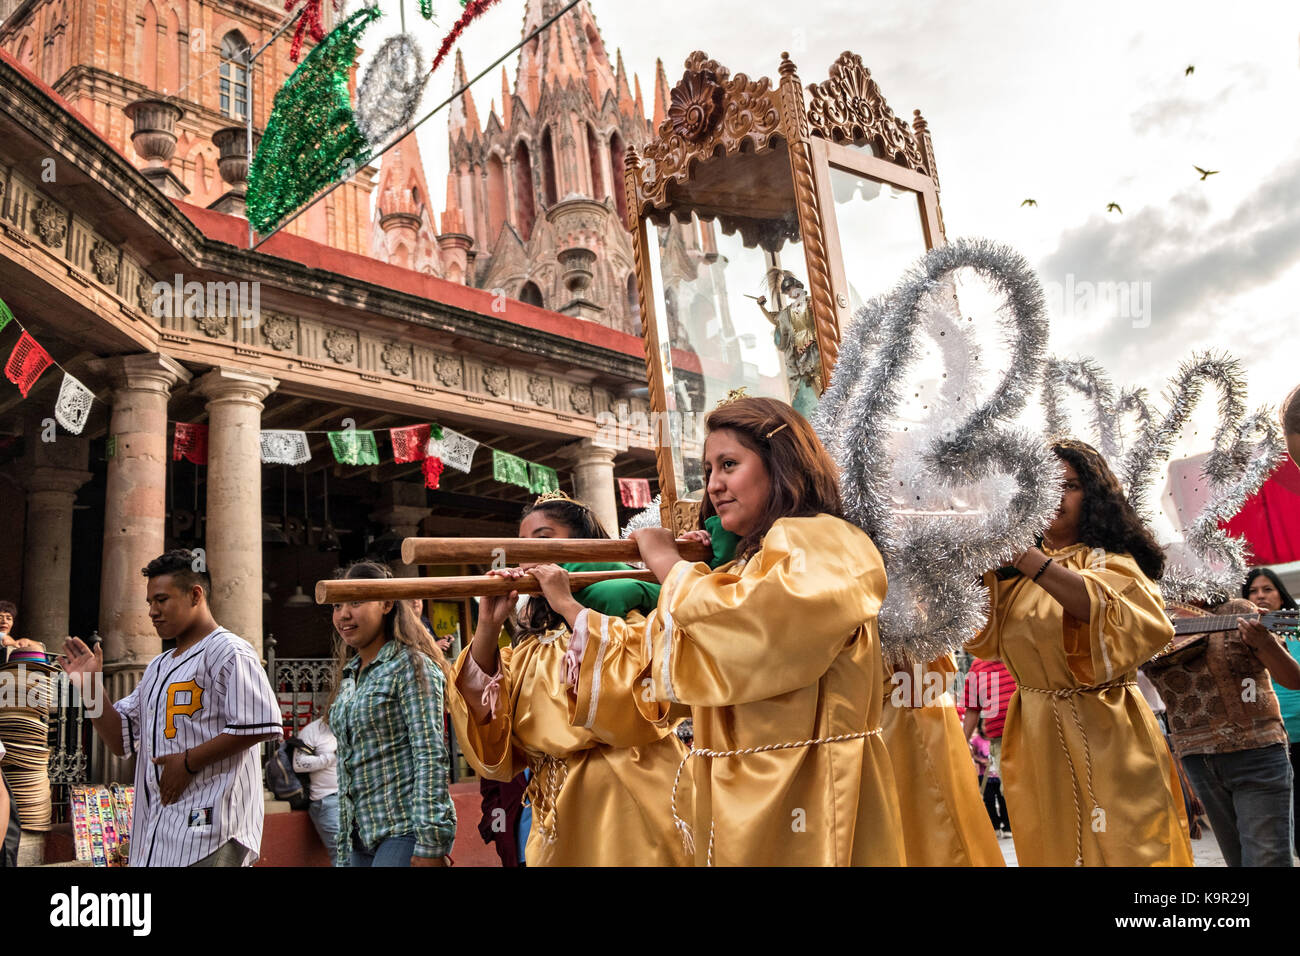 Woman dressed as angels carry the statue of Saint Michael from the Parroquia de San Miguel Arcangel church at the start of the week long fiesta of the patron saint September 21, 2017 in San Miguel de Allende, Mexico. Stock Photo